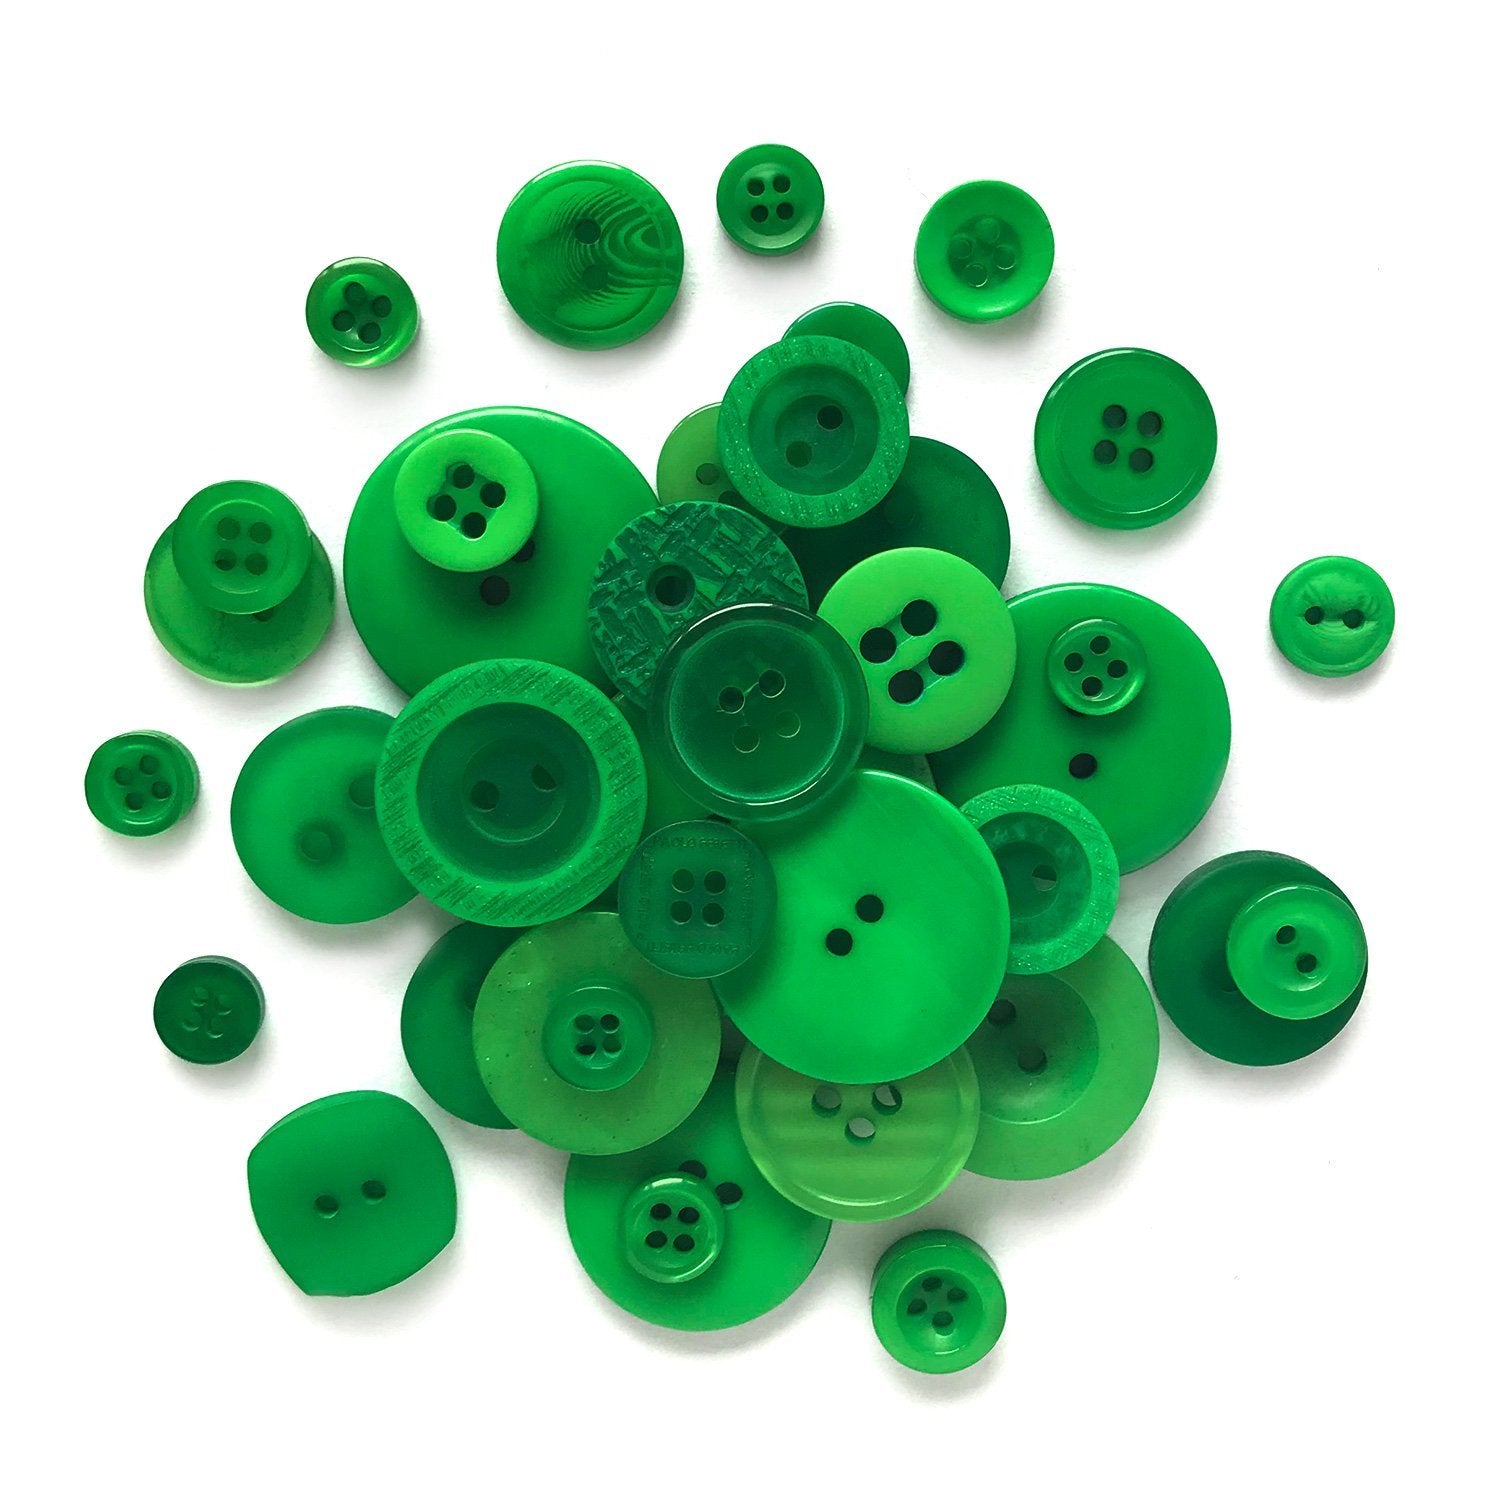 Qovydx 1600Pcs Green Buttons for Crafts Assorted Sizes Buttons Green in  Bulk Green Craft Buttons Assortment Christmas Buttons